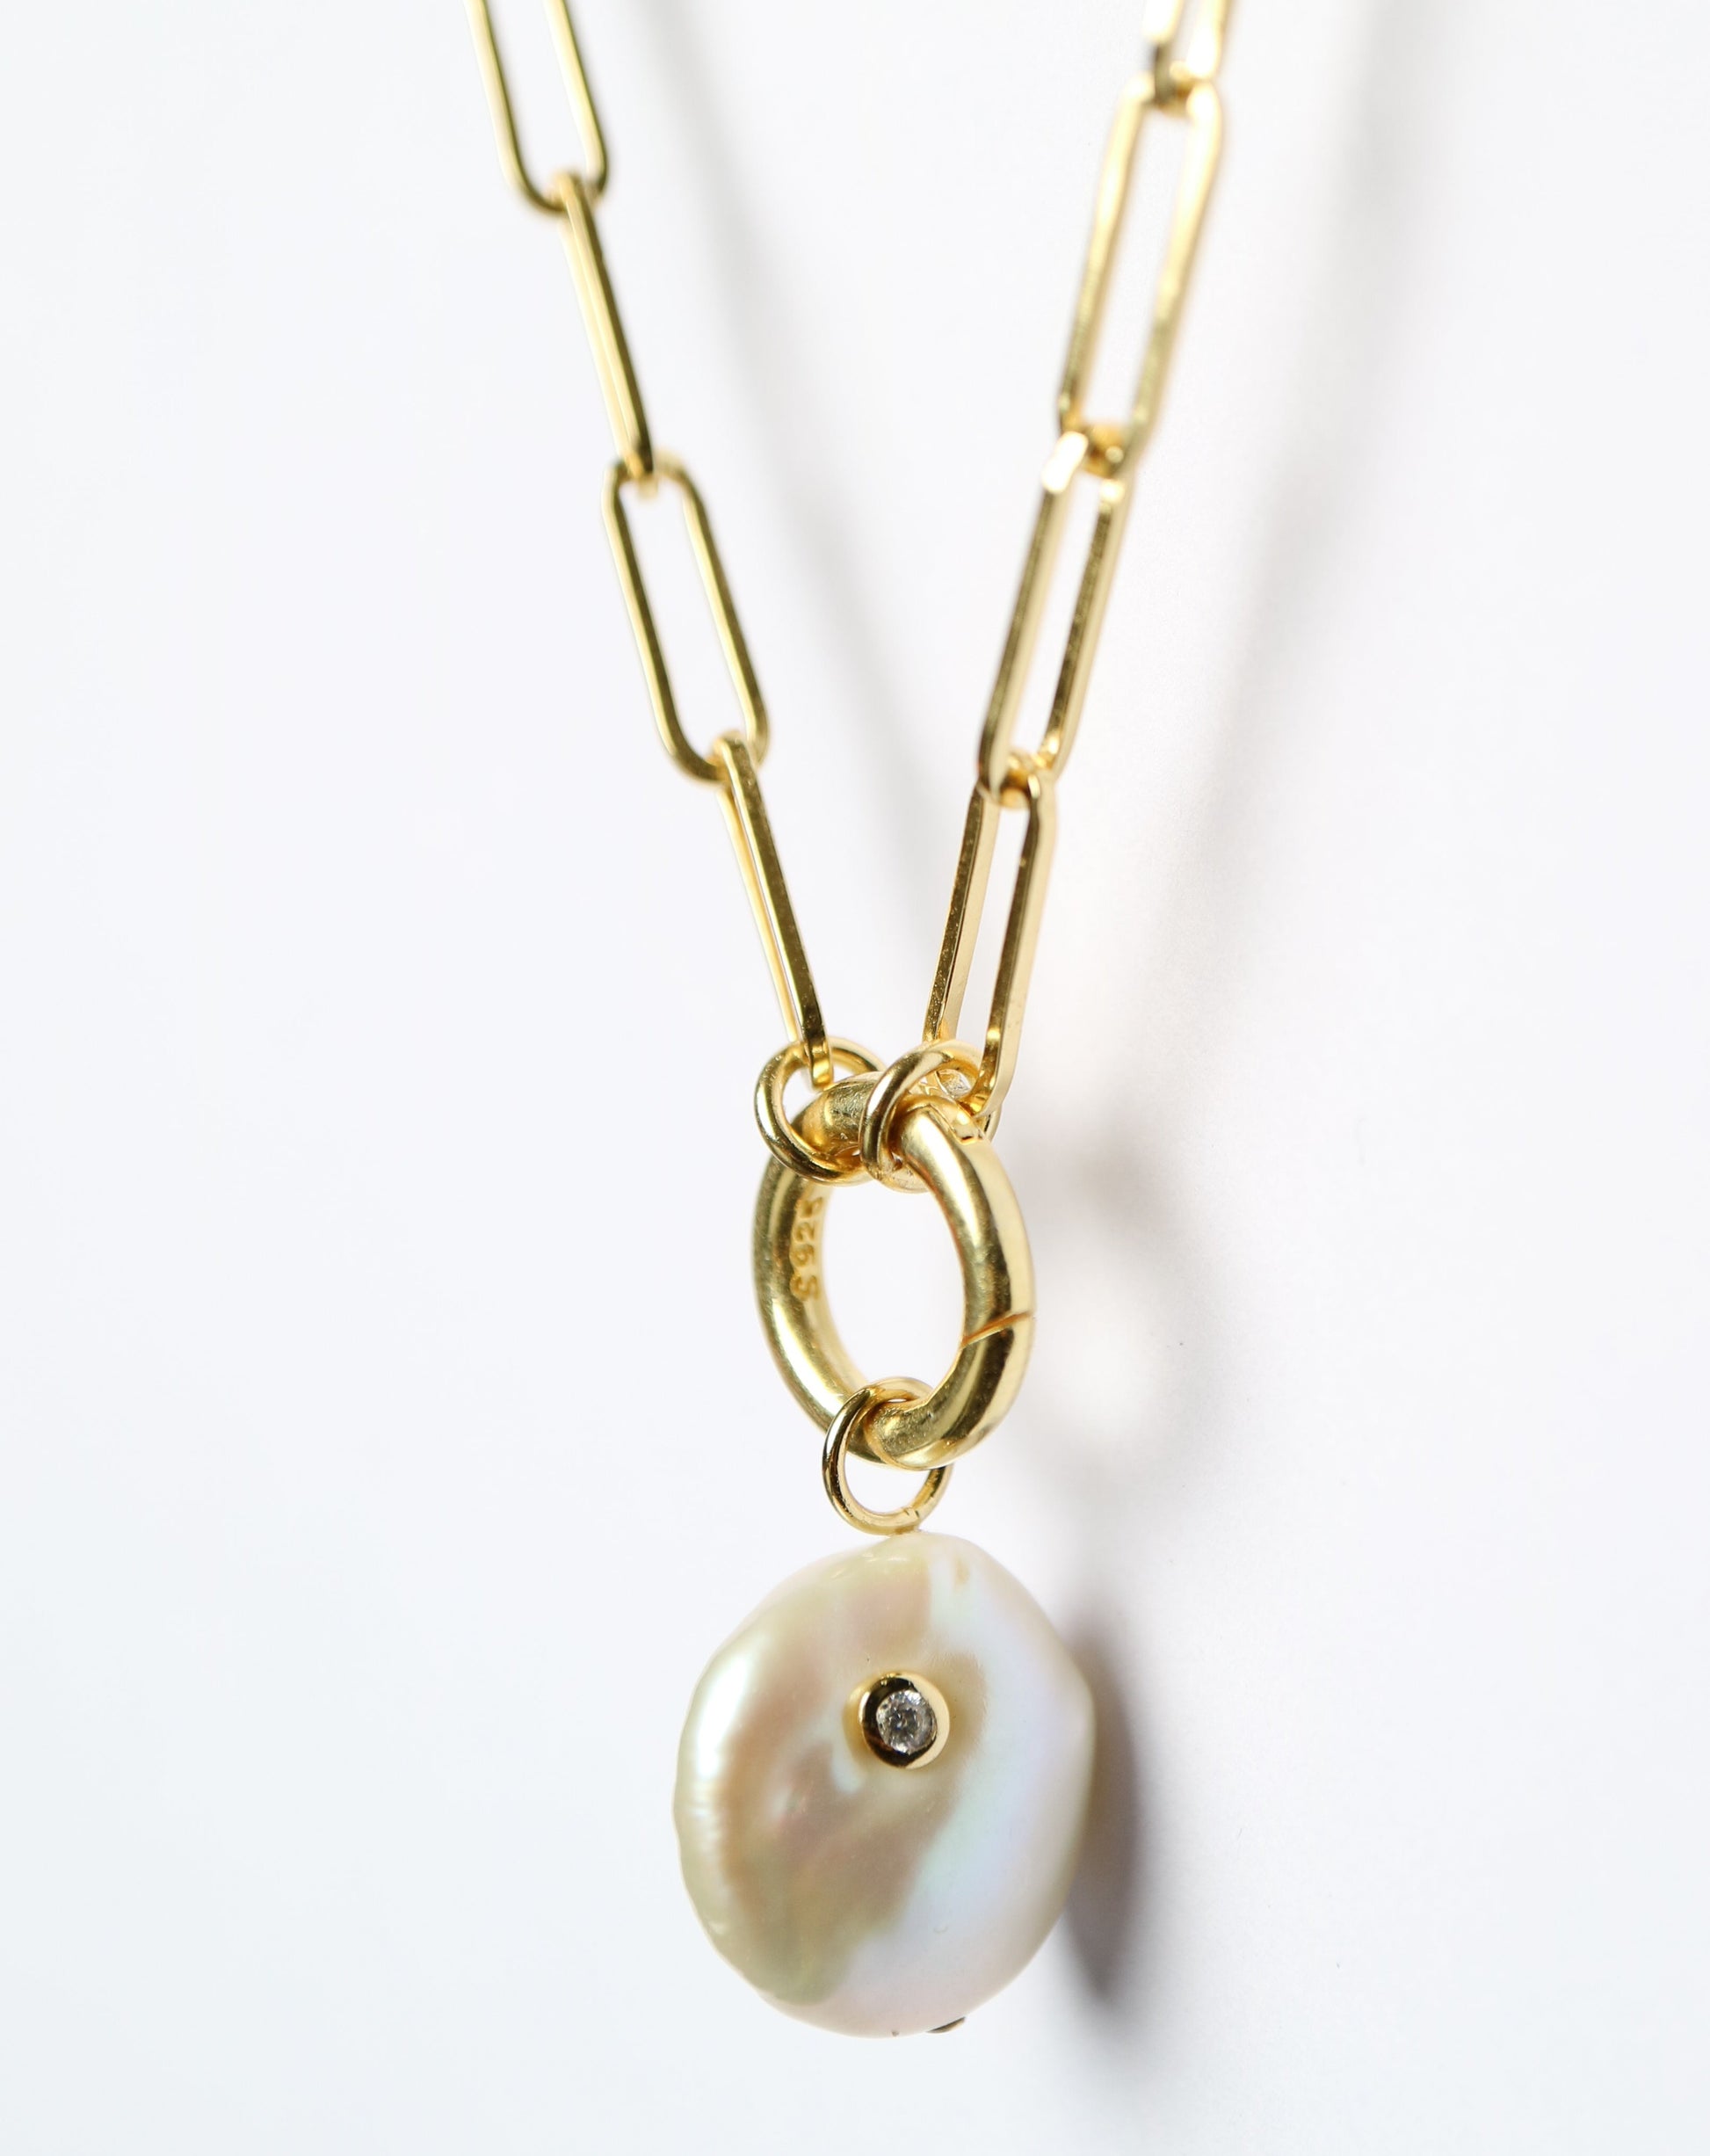 Gold Paperclip Necklace with pearl charm